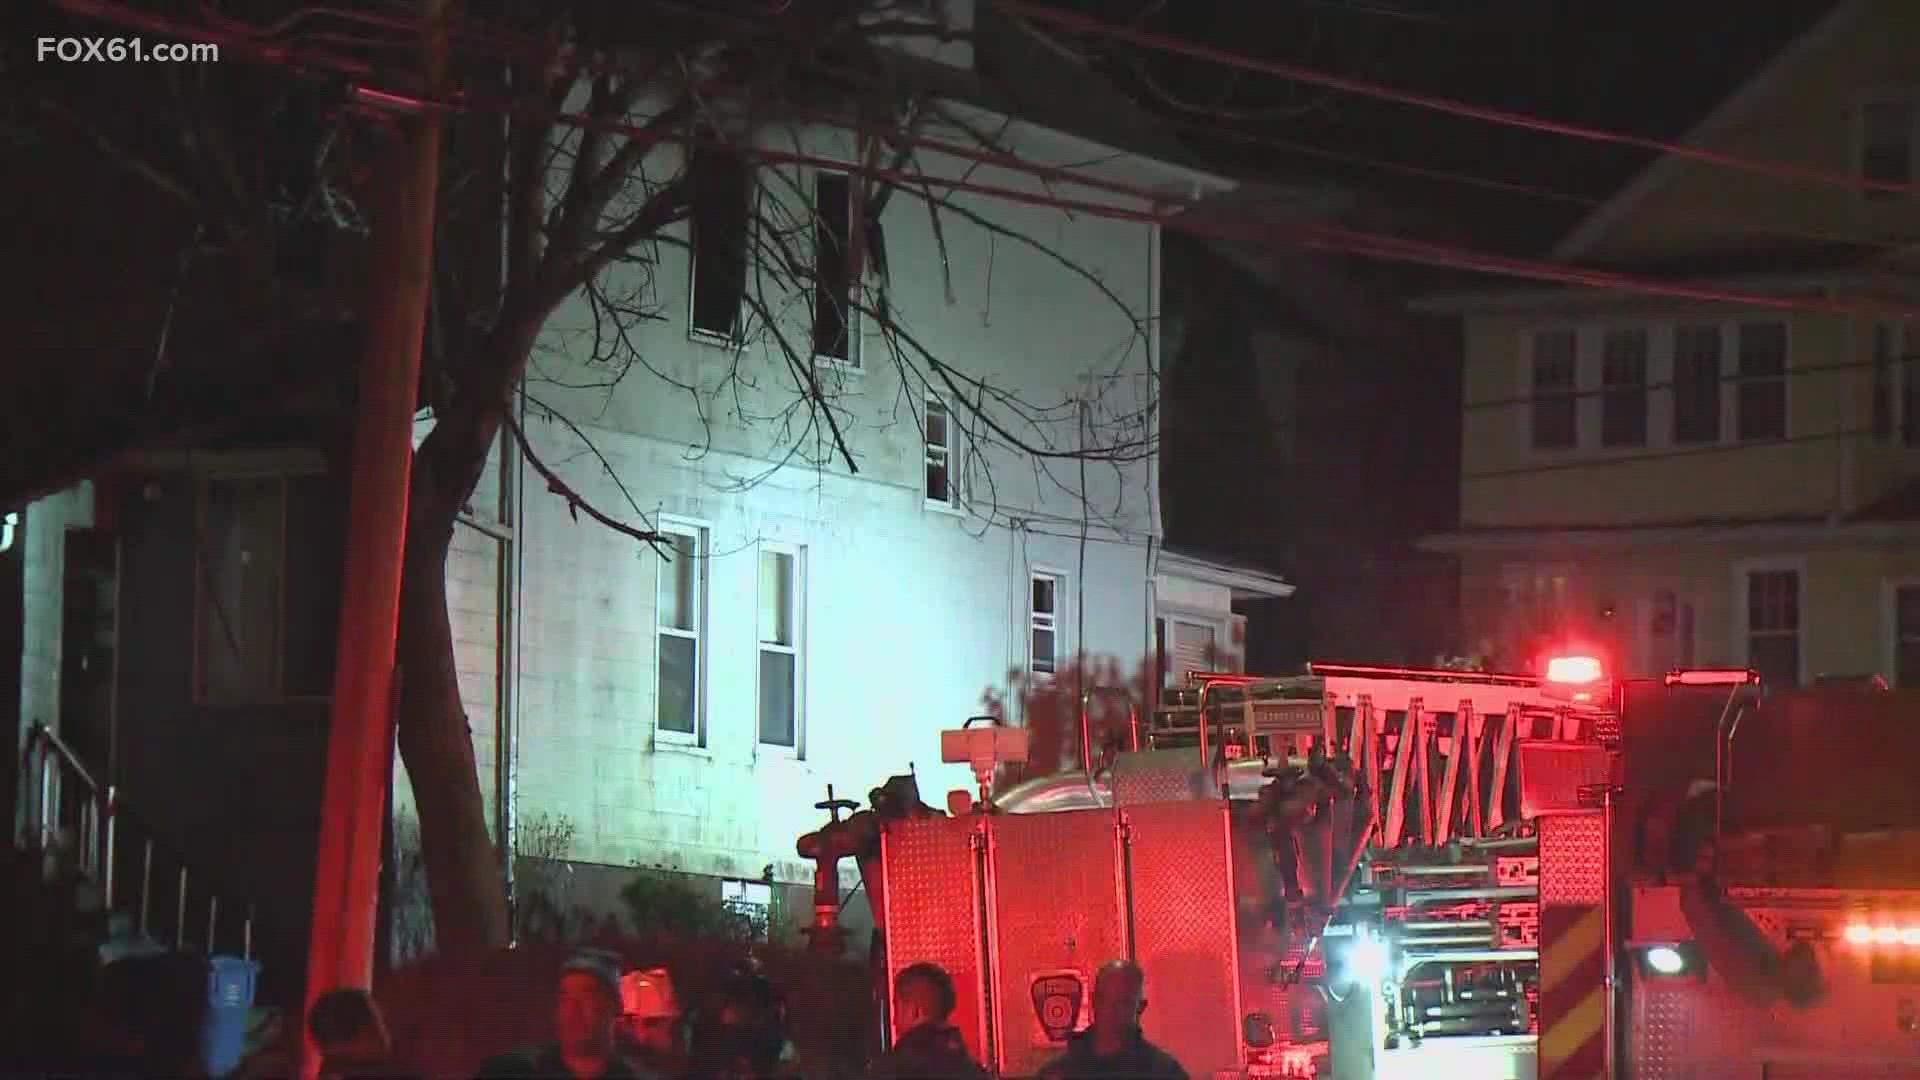 Two people lived in the home, one woman was saved and is in stable conditions.